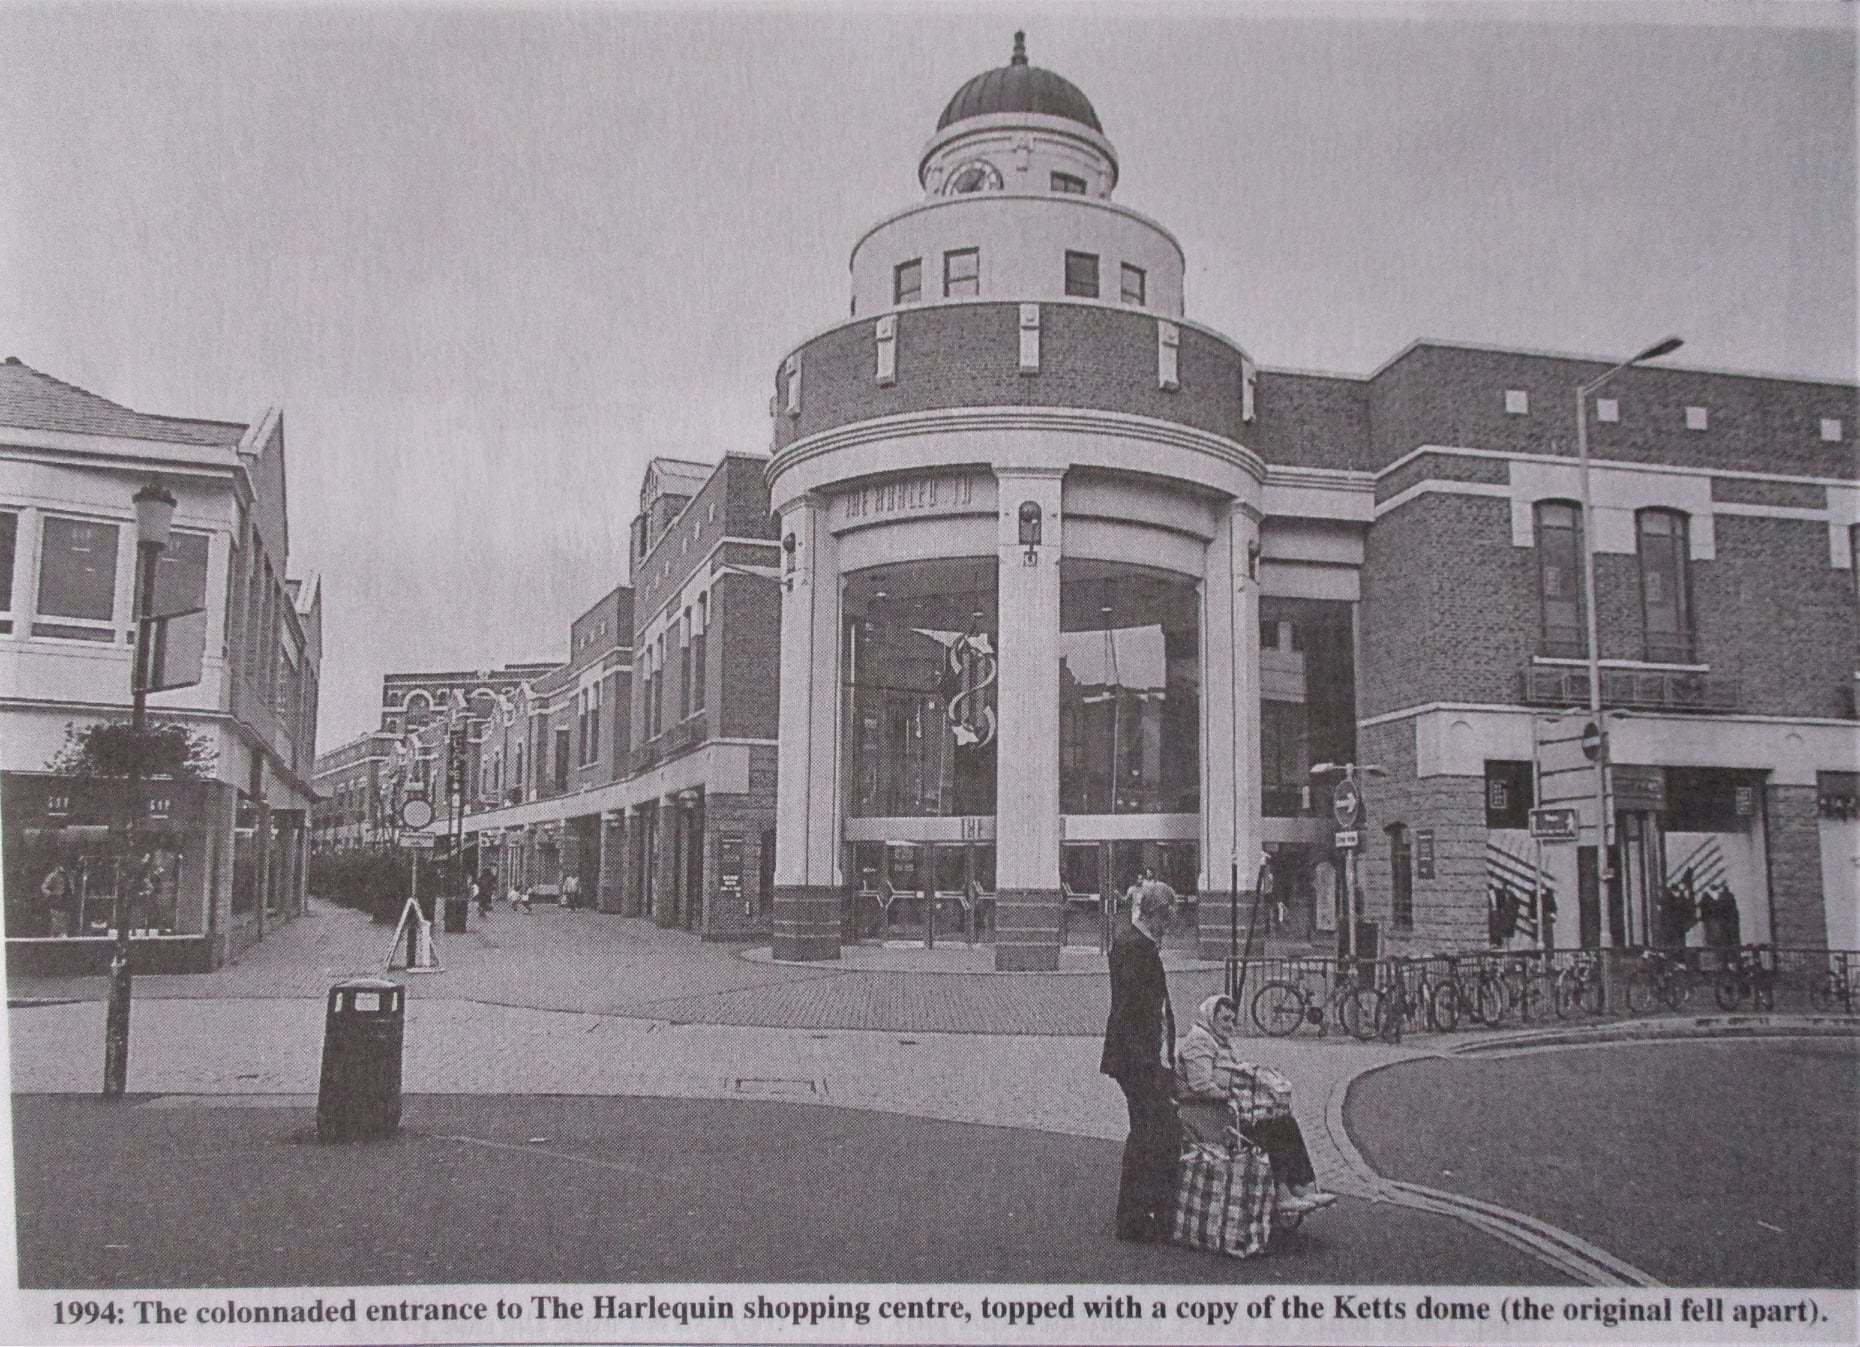 1994: The colonnaded entrance to The Harlequin shopping centre, topped with a copy of the Ketts dome (the original fell apart)